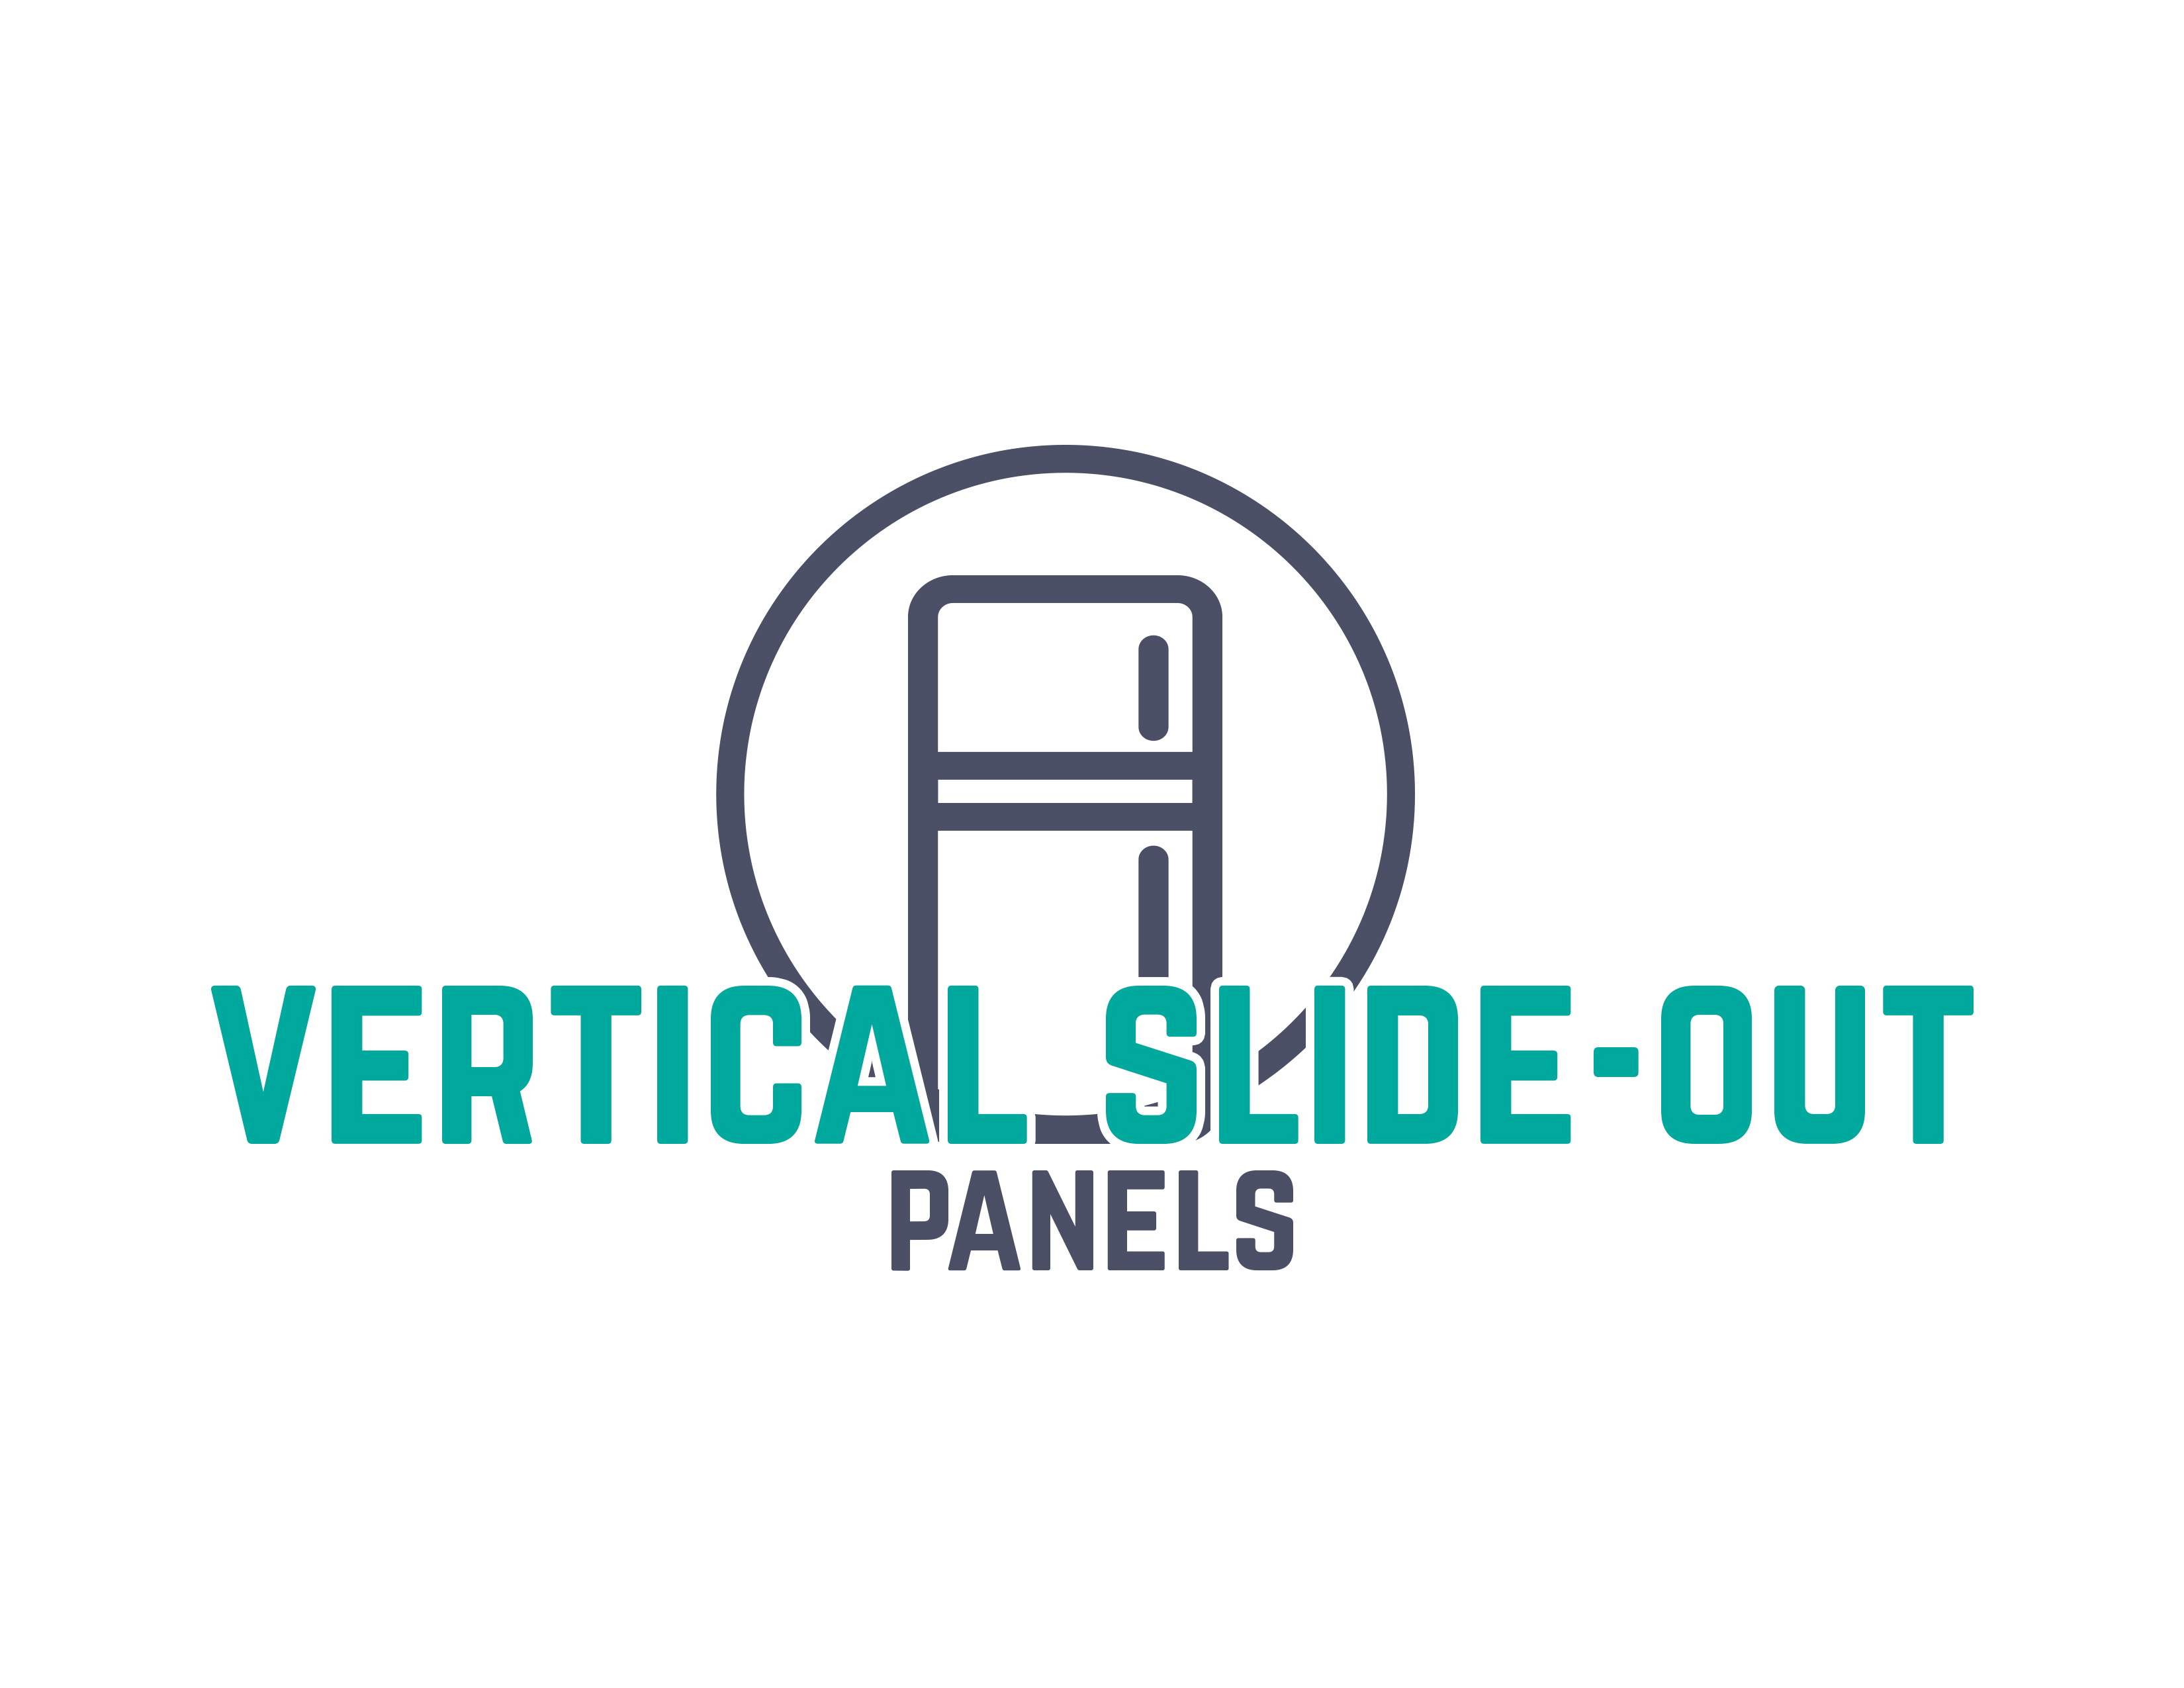 The Vertical Slide-Out Panels will help save people time and money by preventing rotten food.